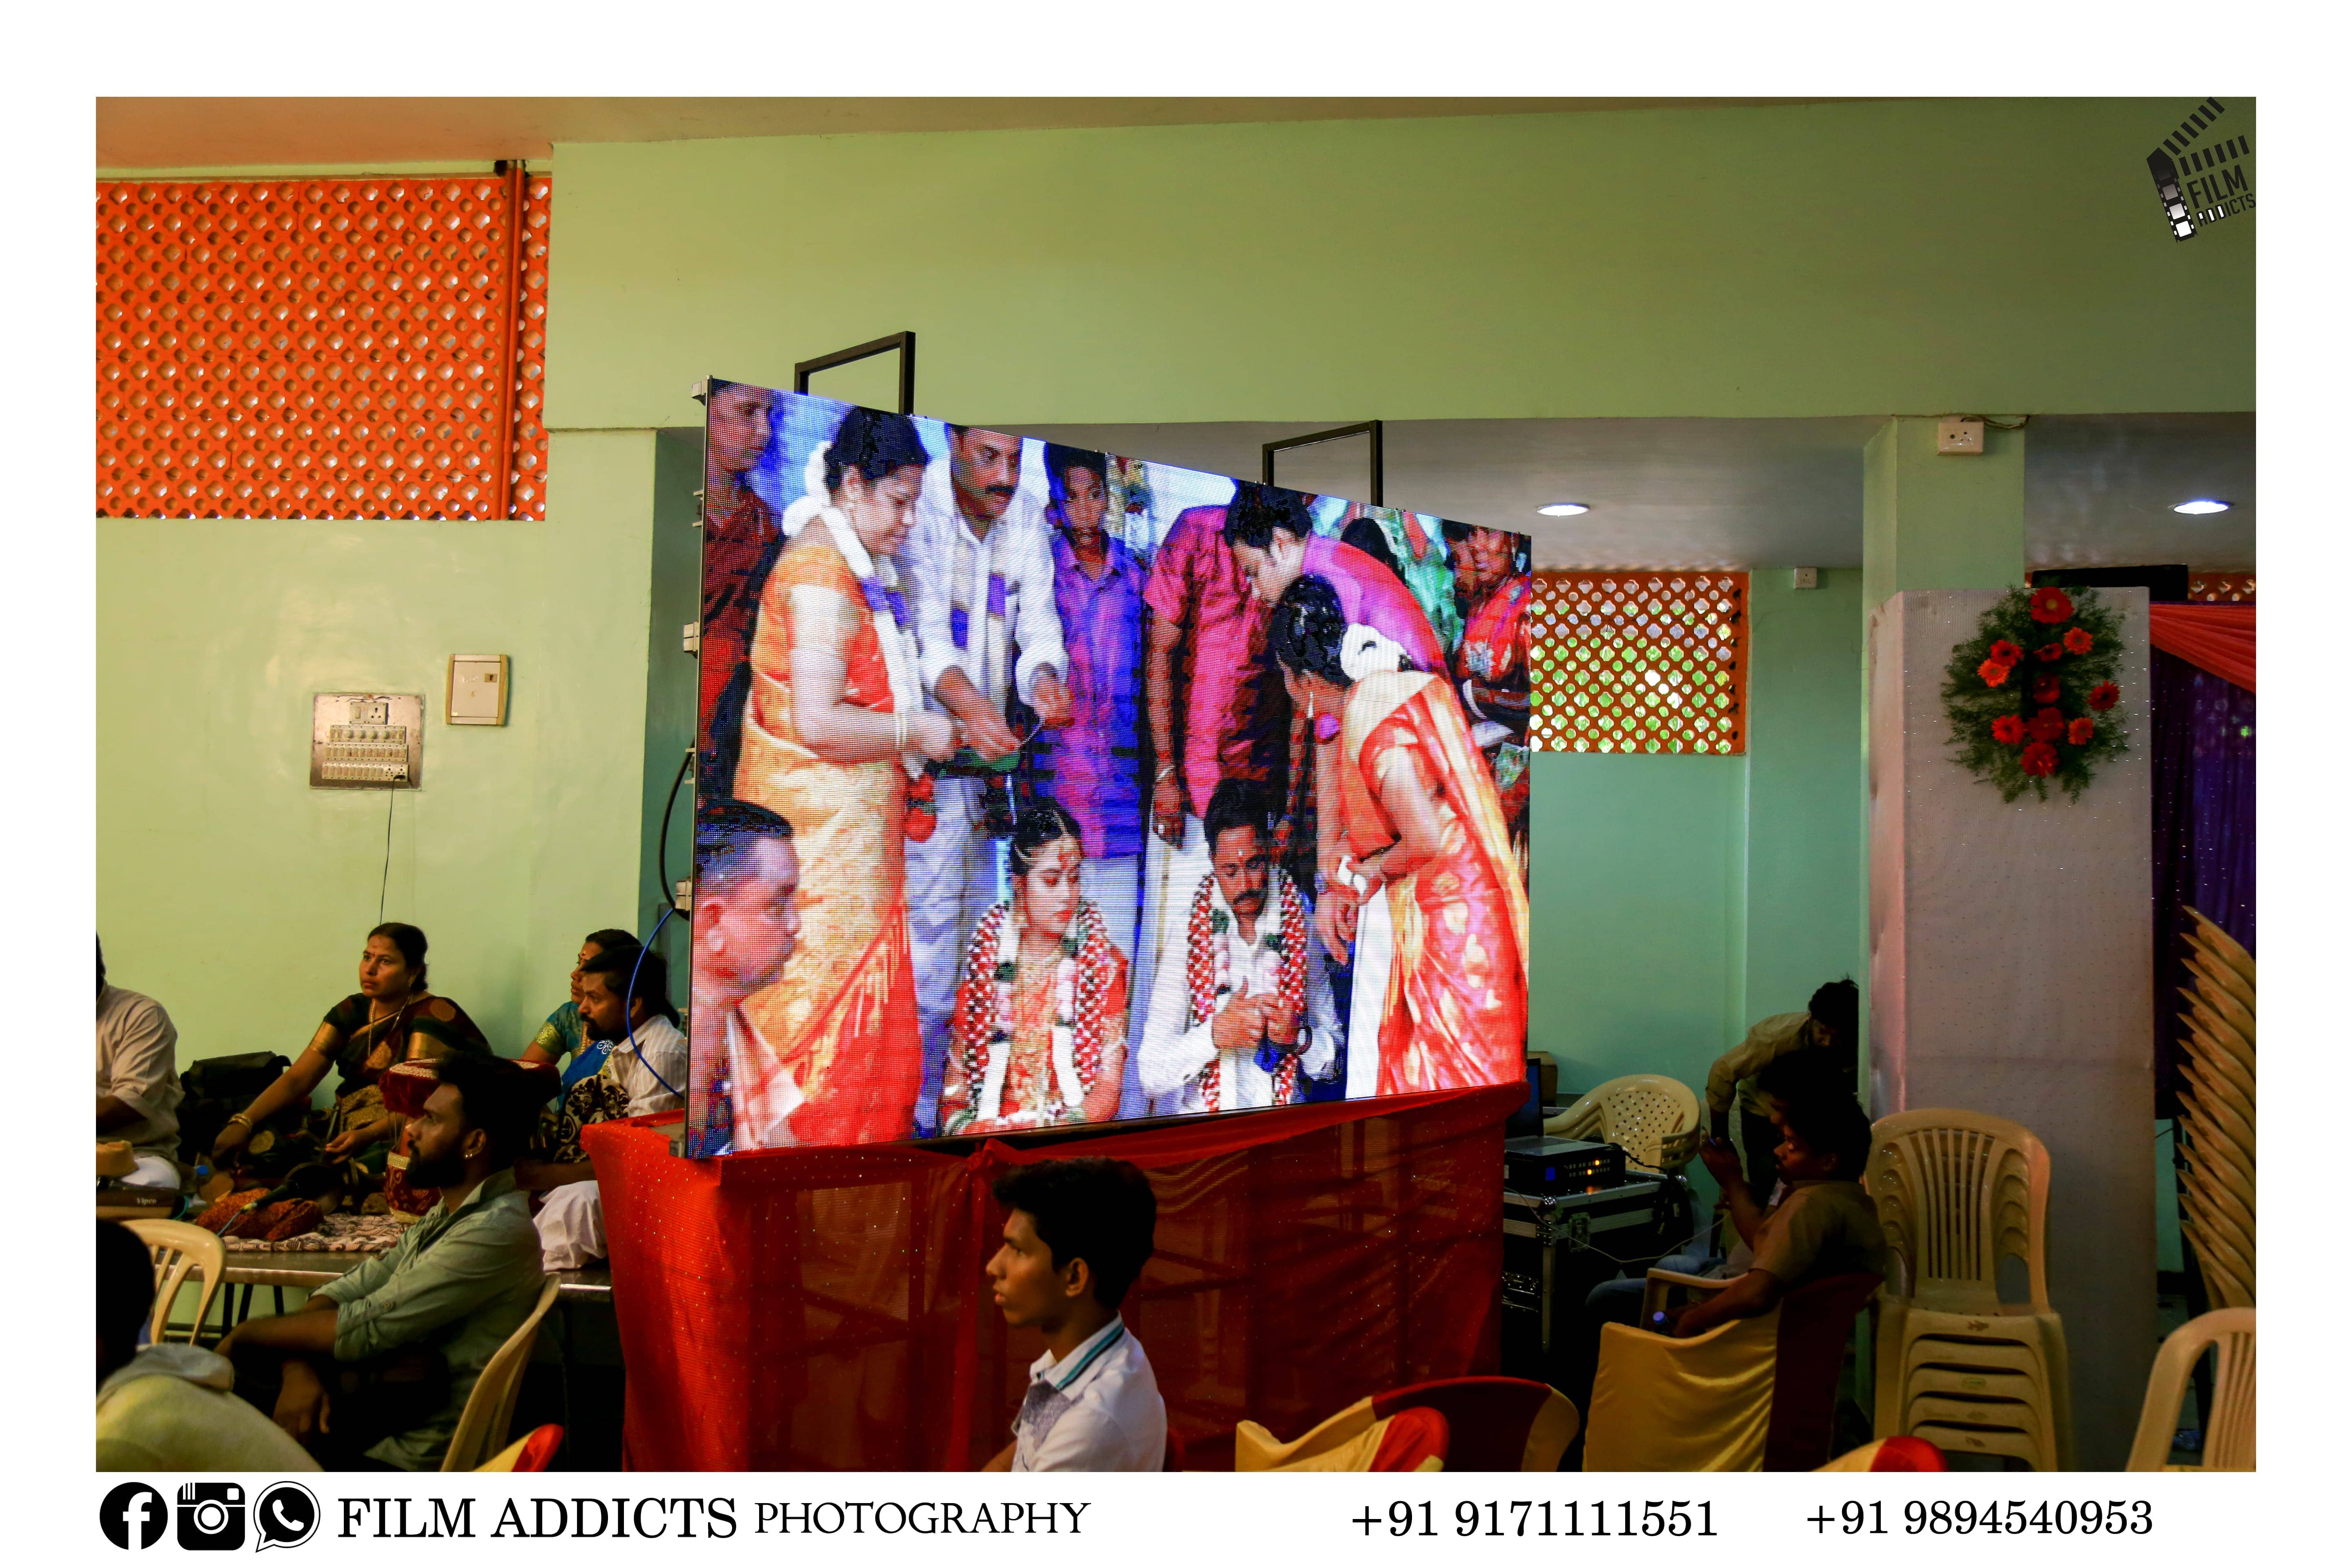 Led wall in Thanjavur, Led wall rental in Thanjavur, Led wall display in Thanjavur, Led wall wedding in Thanjavur, Led wall for wedding reception, Led wall event in Thanjavur, Led wall event management in Thanjavur, Led video wall for events in Thanjavur, led video wall rental in Thanjavur, wedding led video wall rental & hiring Thanjavur, marriage led video wall rental & hiring in Thanjavur, wedding led screen rental Thanjavur, marriage led screen Thanjavur, indoor & outdoor led video wall in Thanjavur, led wall in marriage, led wall rental in Thanjavur, led rental, led video wall hiring Thanjavur, marriage led screen, wedding led screen rental,live streaming in Thanjavur, live streaming, live tv, live streaming wedding, wedding live streaming Thanjavur, marriage live streaming Thanjavur, live streaming services in Thanjavur, live streaming wedding Thanjavur.